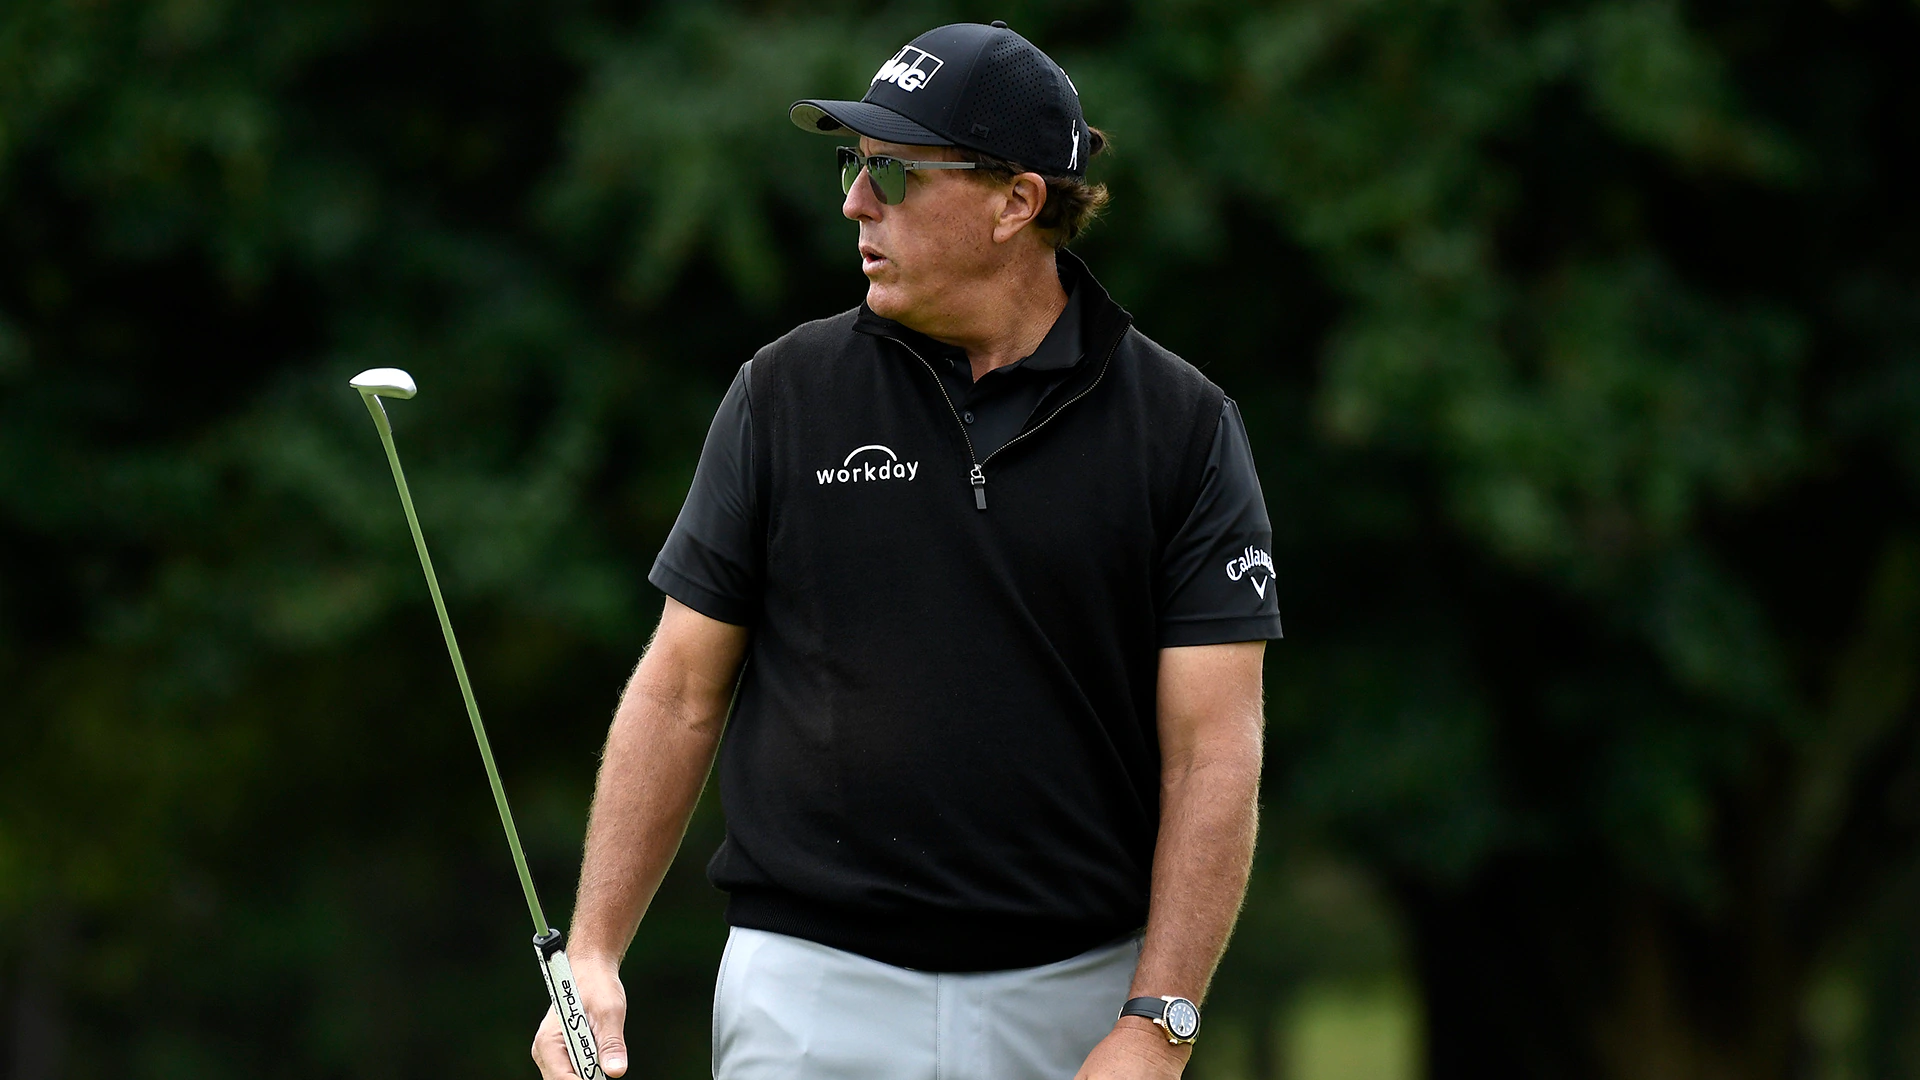 Phil Mickelson unsure about playing in front of fans at Houston Open